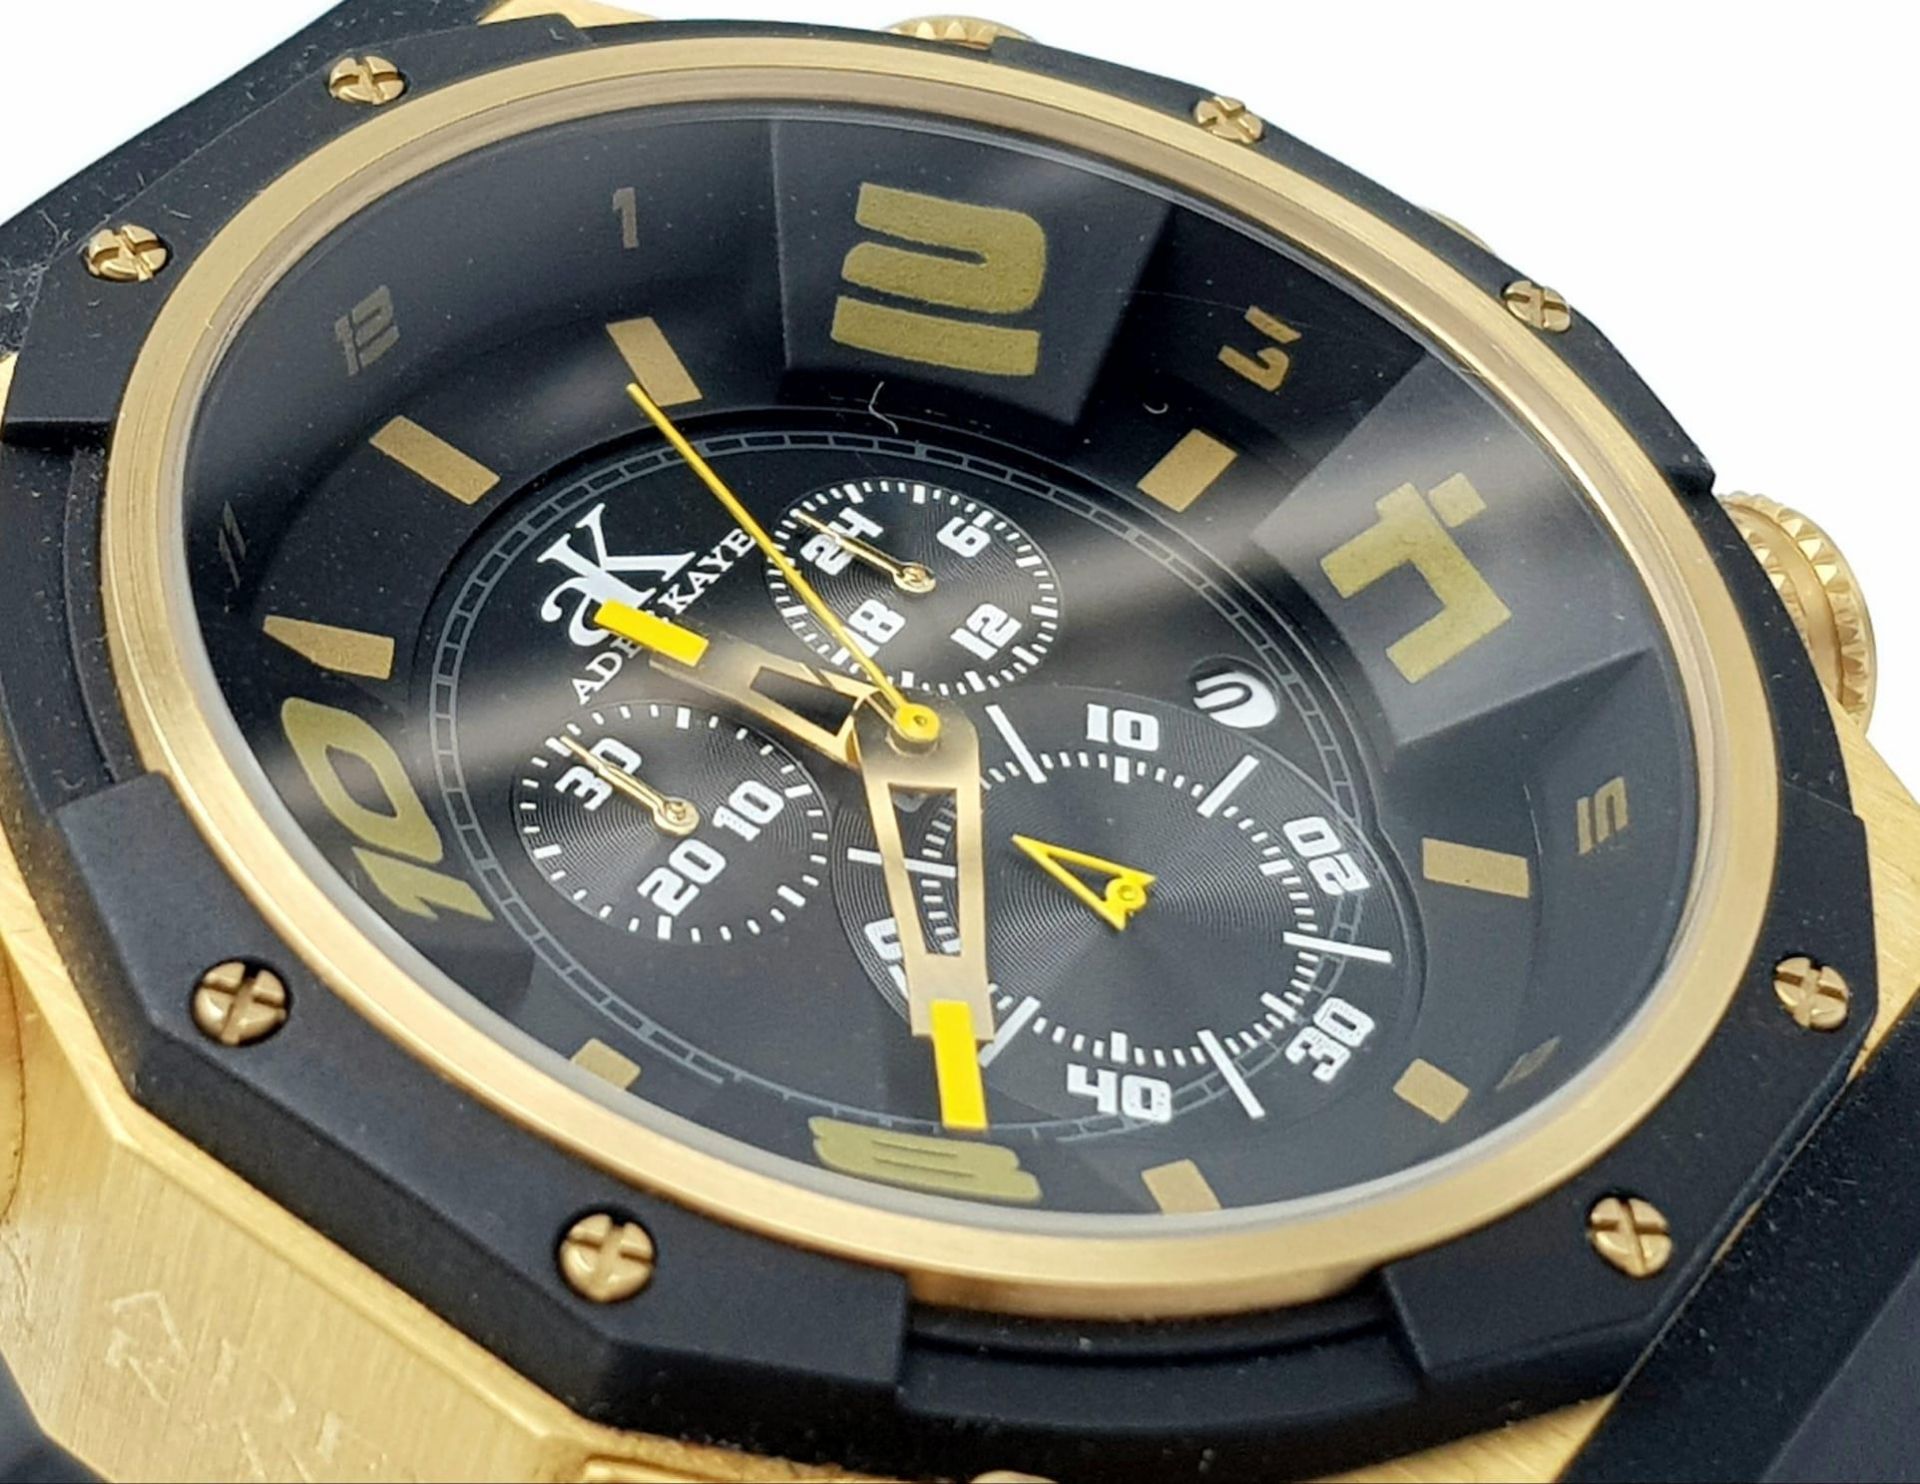 An Unworn Limited Edition Run Adee Kaye, Beverley Hills, Oversize Sports Chronograph. 65mm Including - Image 4 of 7